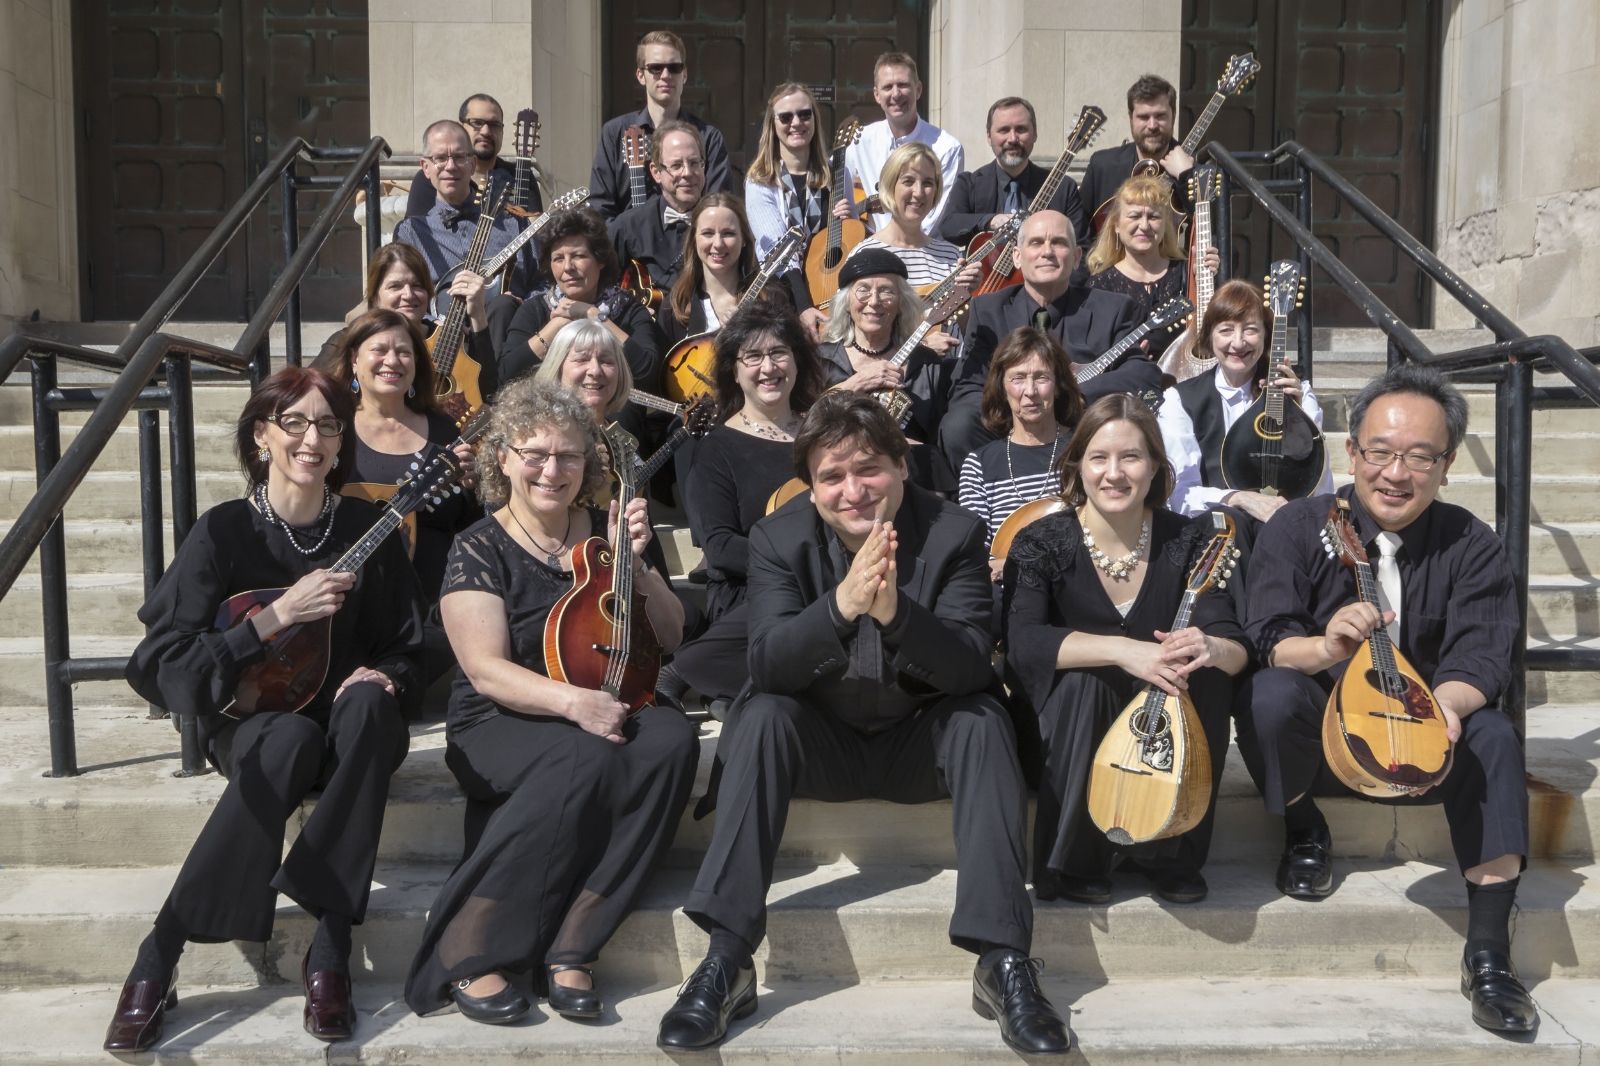 Established in 1900, the Milwaukee Mandolin Orchestra continues to perform throughout Milwaukee and around the world today. 